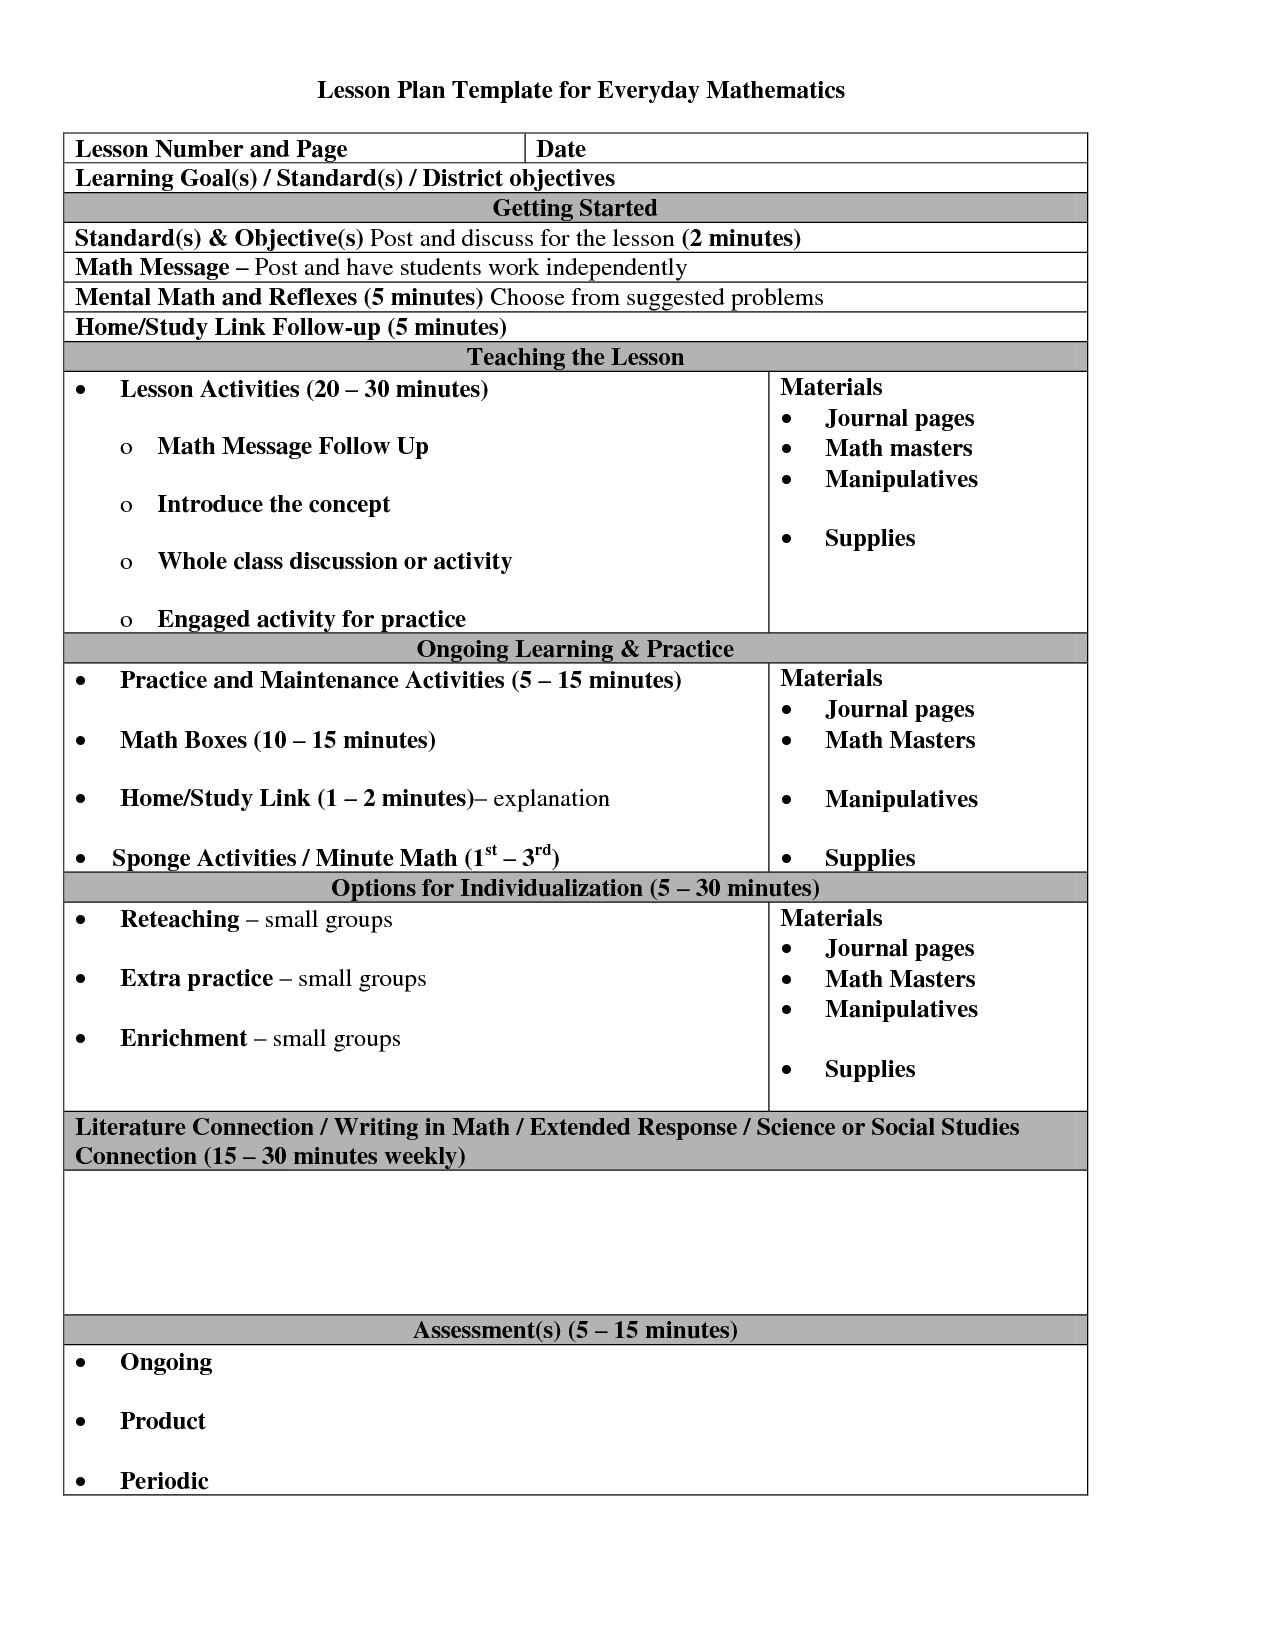 Lesson Plan for Maths Everyday Math Lesson Plan Template